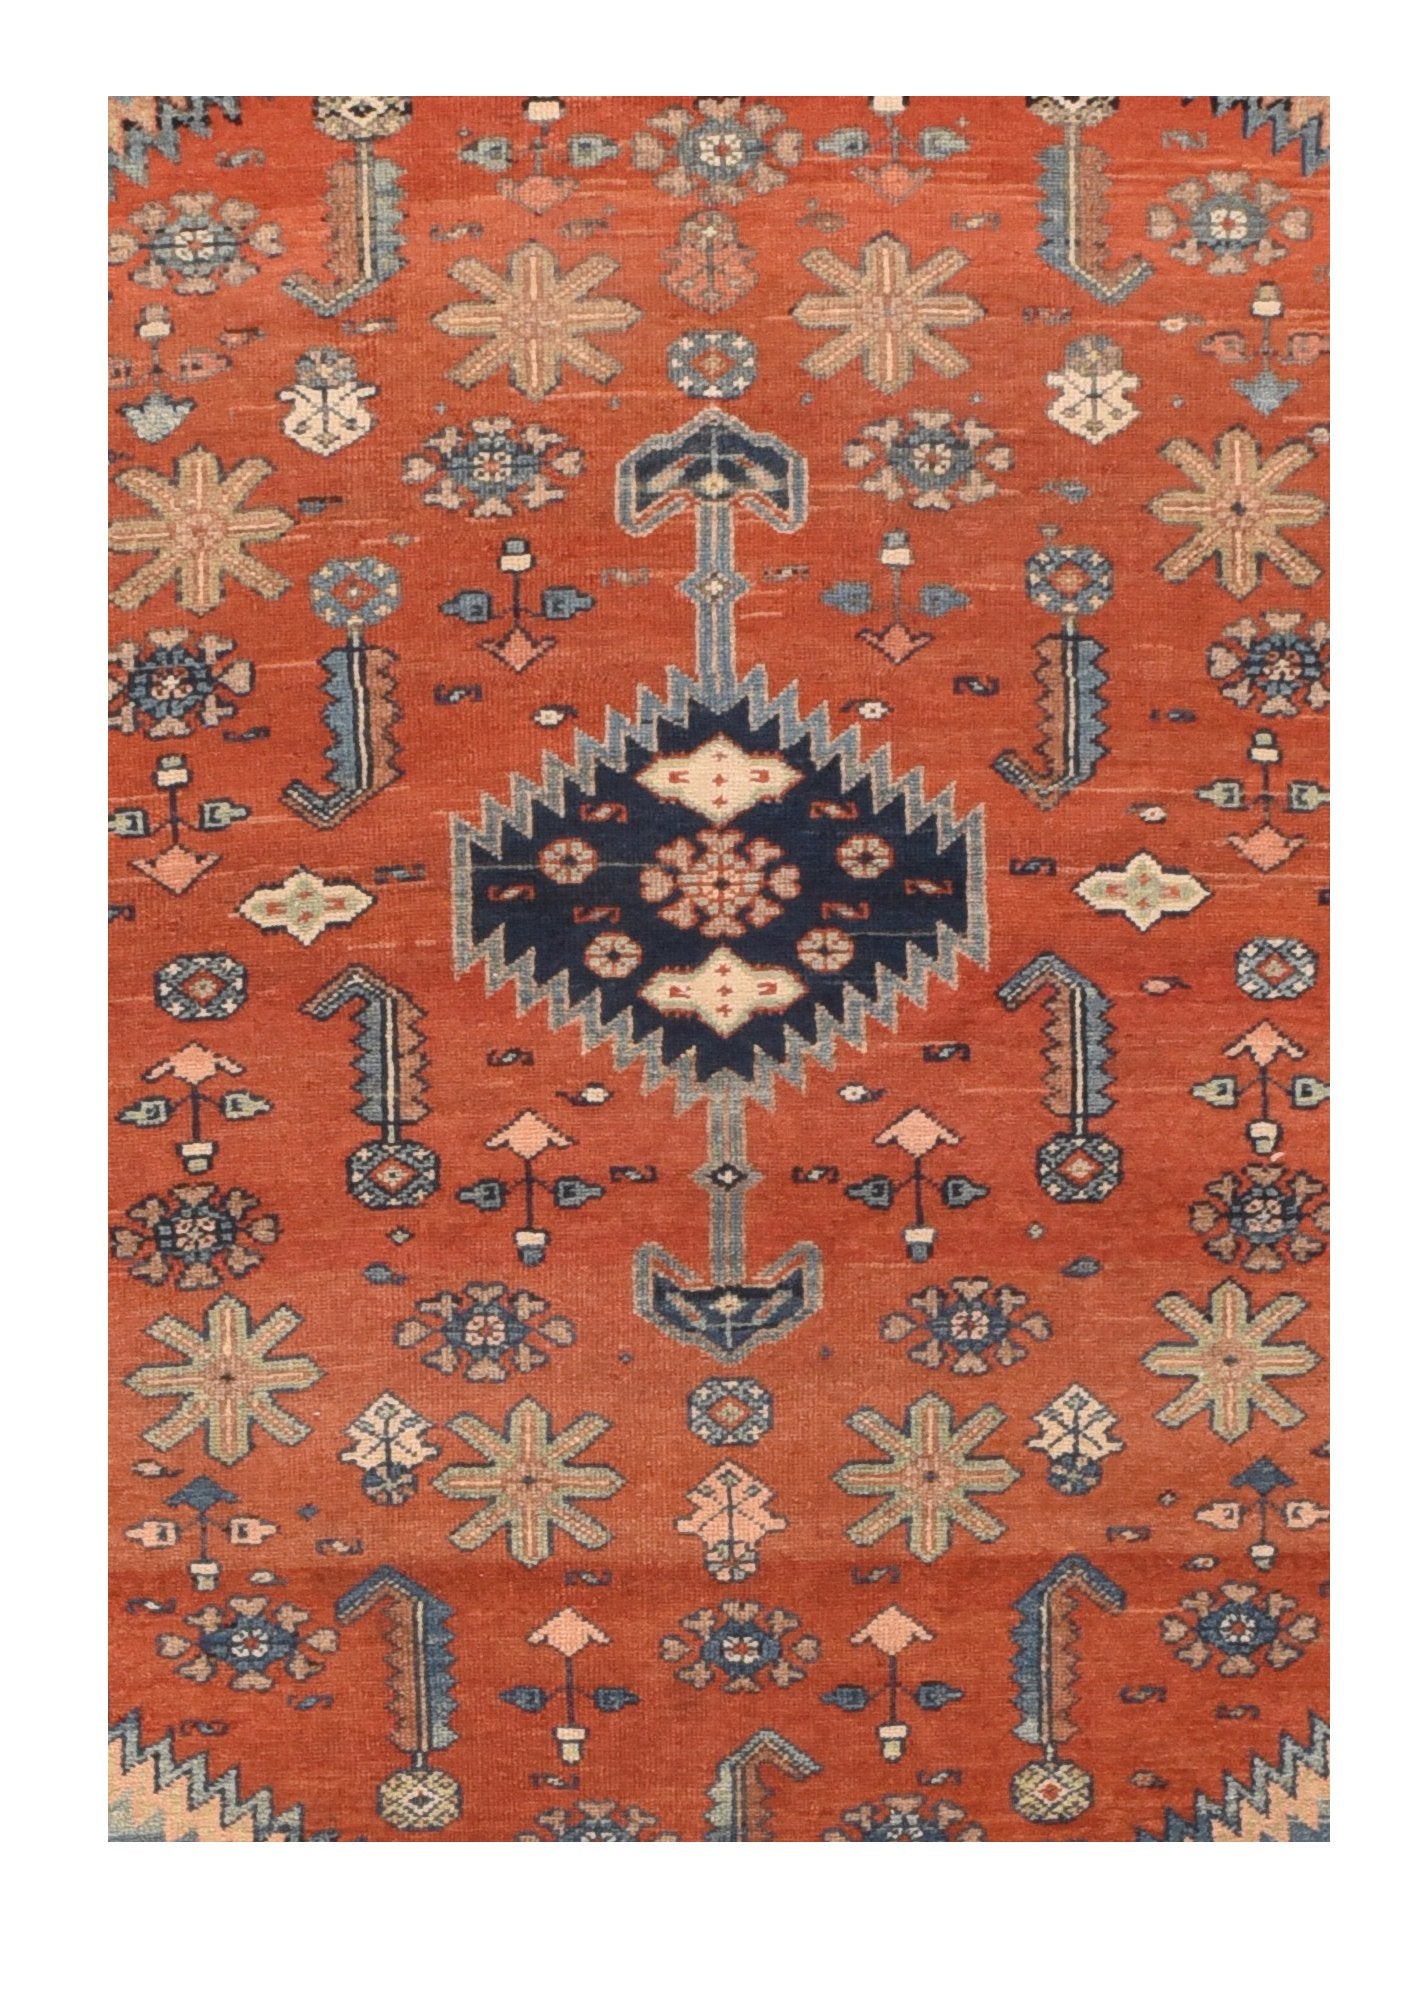 Antique Red Persian Malayer Area Rug